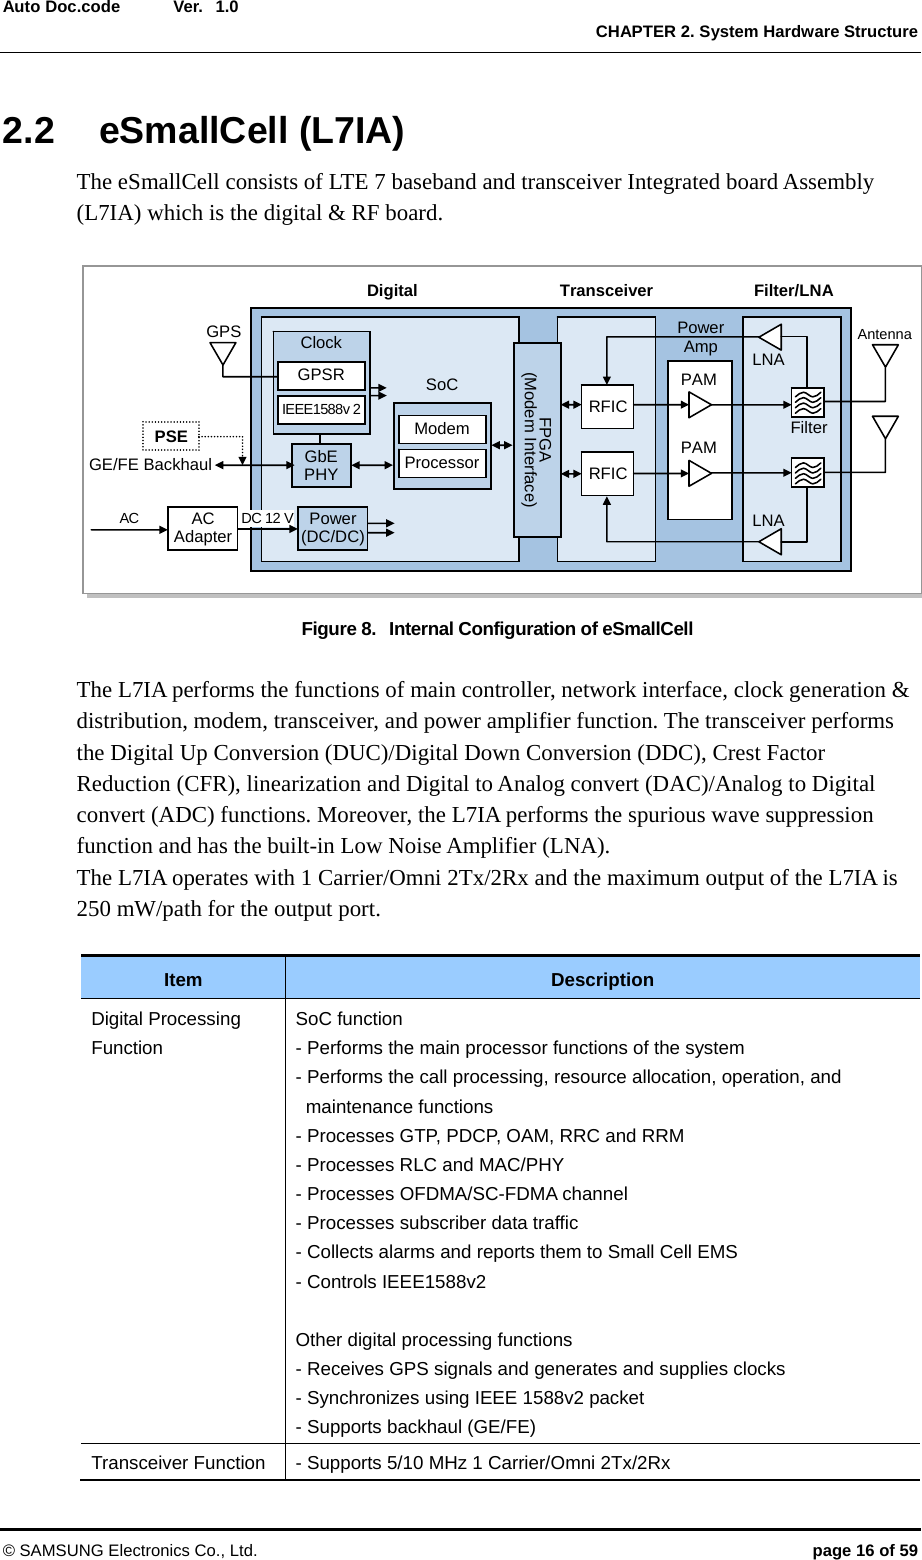  Ver.   CHAPTER 2. System Hardware Structure © SAMSUNG Electronics Co., Ltd.  page 16 of 59 Auto Doc.code  1.02.2 eSmallCell (L7IA) The eSmallCell consists of LTE 7 baseband and transceiver Integrated board Assembly (L7IA) which is the digital &amp; RF board.  Figure 8.   Internal Configuration of eSmallCell  The L7IA performs the functions of main controller, network interface, clock generation &amp; distribution, modem, transceiver, and power amplifier function. The transceiver performs the Digital Up Conversion (DUC)/Digital Down Conversion (DDC), Crest Factor Reduction (CFR), linearization and Digital to Analog convert (DAC)/Analog to Digital convert (ADC) functions. Moreover, the L7IA performs the spurious wave suppression function and has the built-in Low Noise Amplifier (LNA).   The L7IA operates with 1 Carrier/Omni 2Tx/2Rx and the maximum output of the L7IA is 250 mW/path for the output port.    Item  Description Digital Processing Function SoC function - Performs the main processor functions of the system - Performs the call processing, resource allocation, operation, and maintenance functions - Processes GTP, PDCP, OAM, RRC and RRM - Processes RLC and MAC/PHY - Processes OFDMA/SC-FDMA channel - Processes subscriber data traffic - Collects alarms and reports them to Small Cell EMS - Controls IEEE1588v2  Other digital processing functions - Receives GPS signals and generates and supplies clocks - Synchronizes using IEEE 1588v2 packet - Supports backhaul (GE/FE) Transceiver Function  - Supports 5/10 MHz 1 Carrier/Omni 2Tx/2Rx GPSR IEEE1588v 2 Clock GbE PHY Power (DC/DC) Modem Processor SoC FPGA(Modem Interface) RFIC RFIC DigitalPAMPAMLNA LNA Filter AntennaPowerAmp Transceiver Filter/LNA GPS GE/FE Backhaul PSE AC Adapter  DC 12 V  AC 